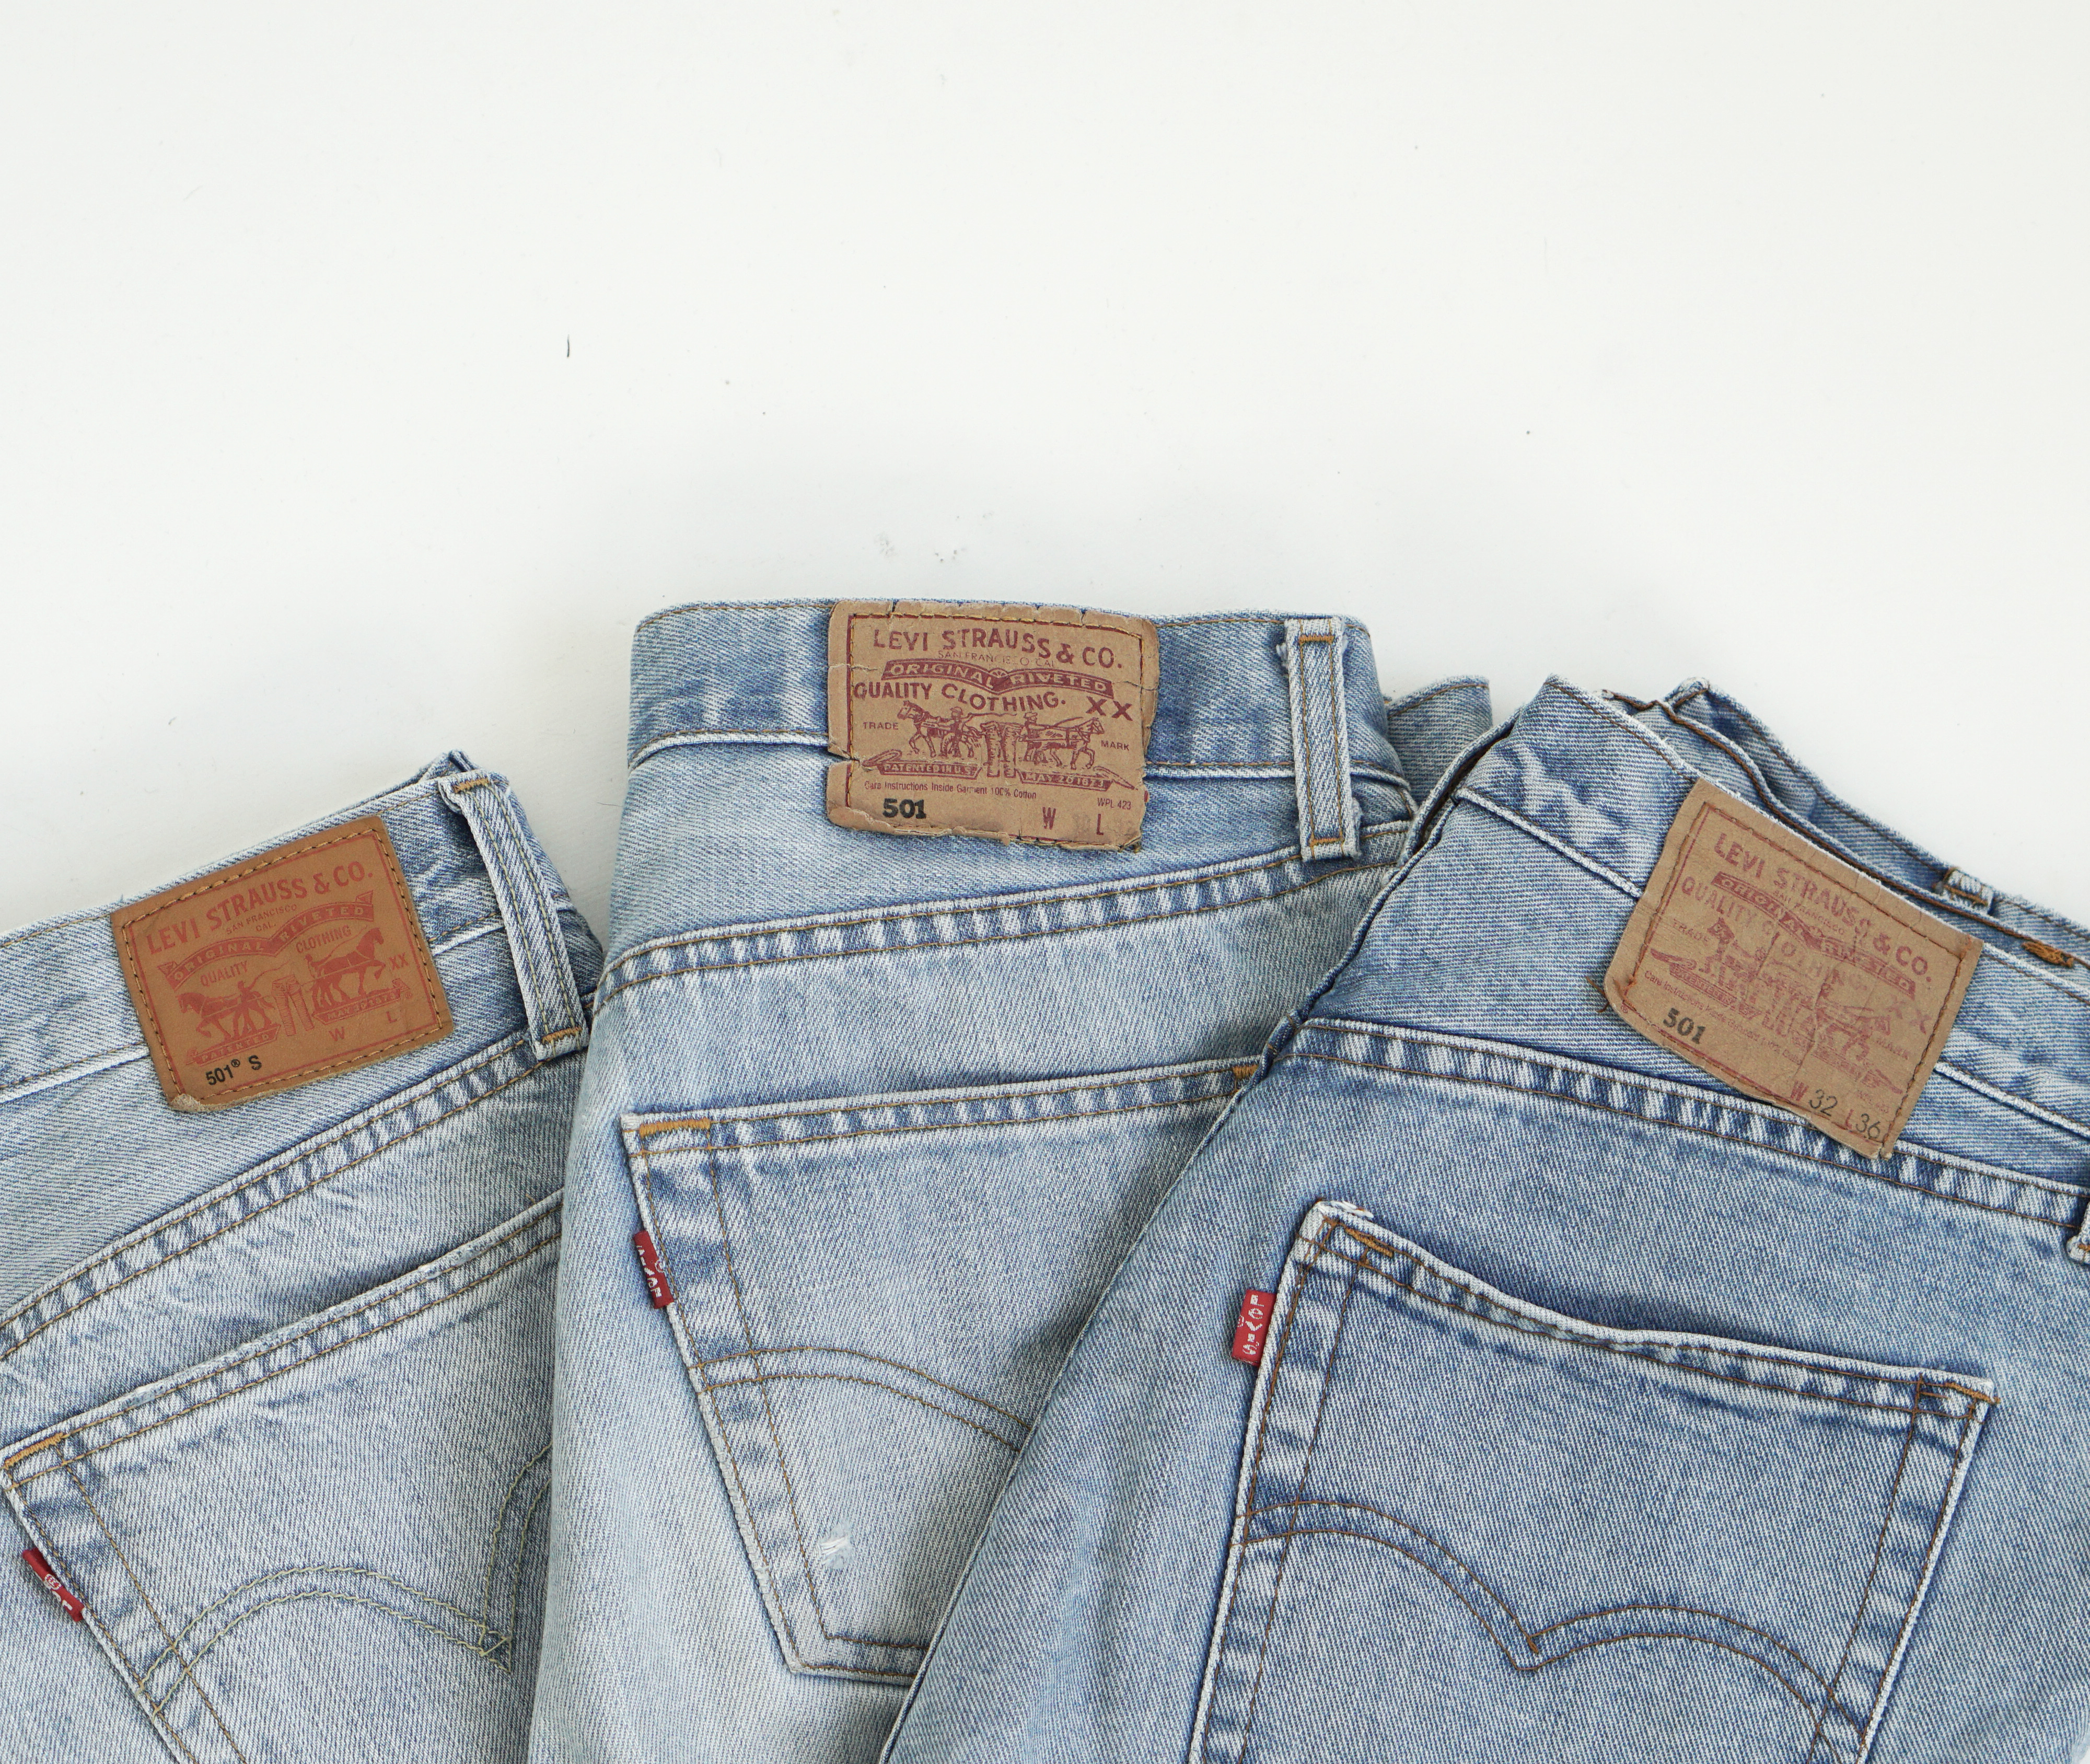 My Levi's jeans guide. – Use less